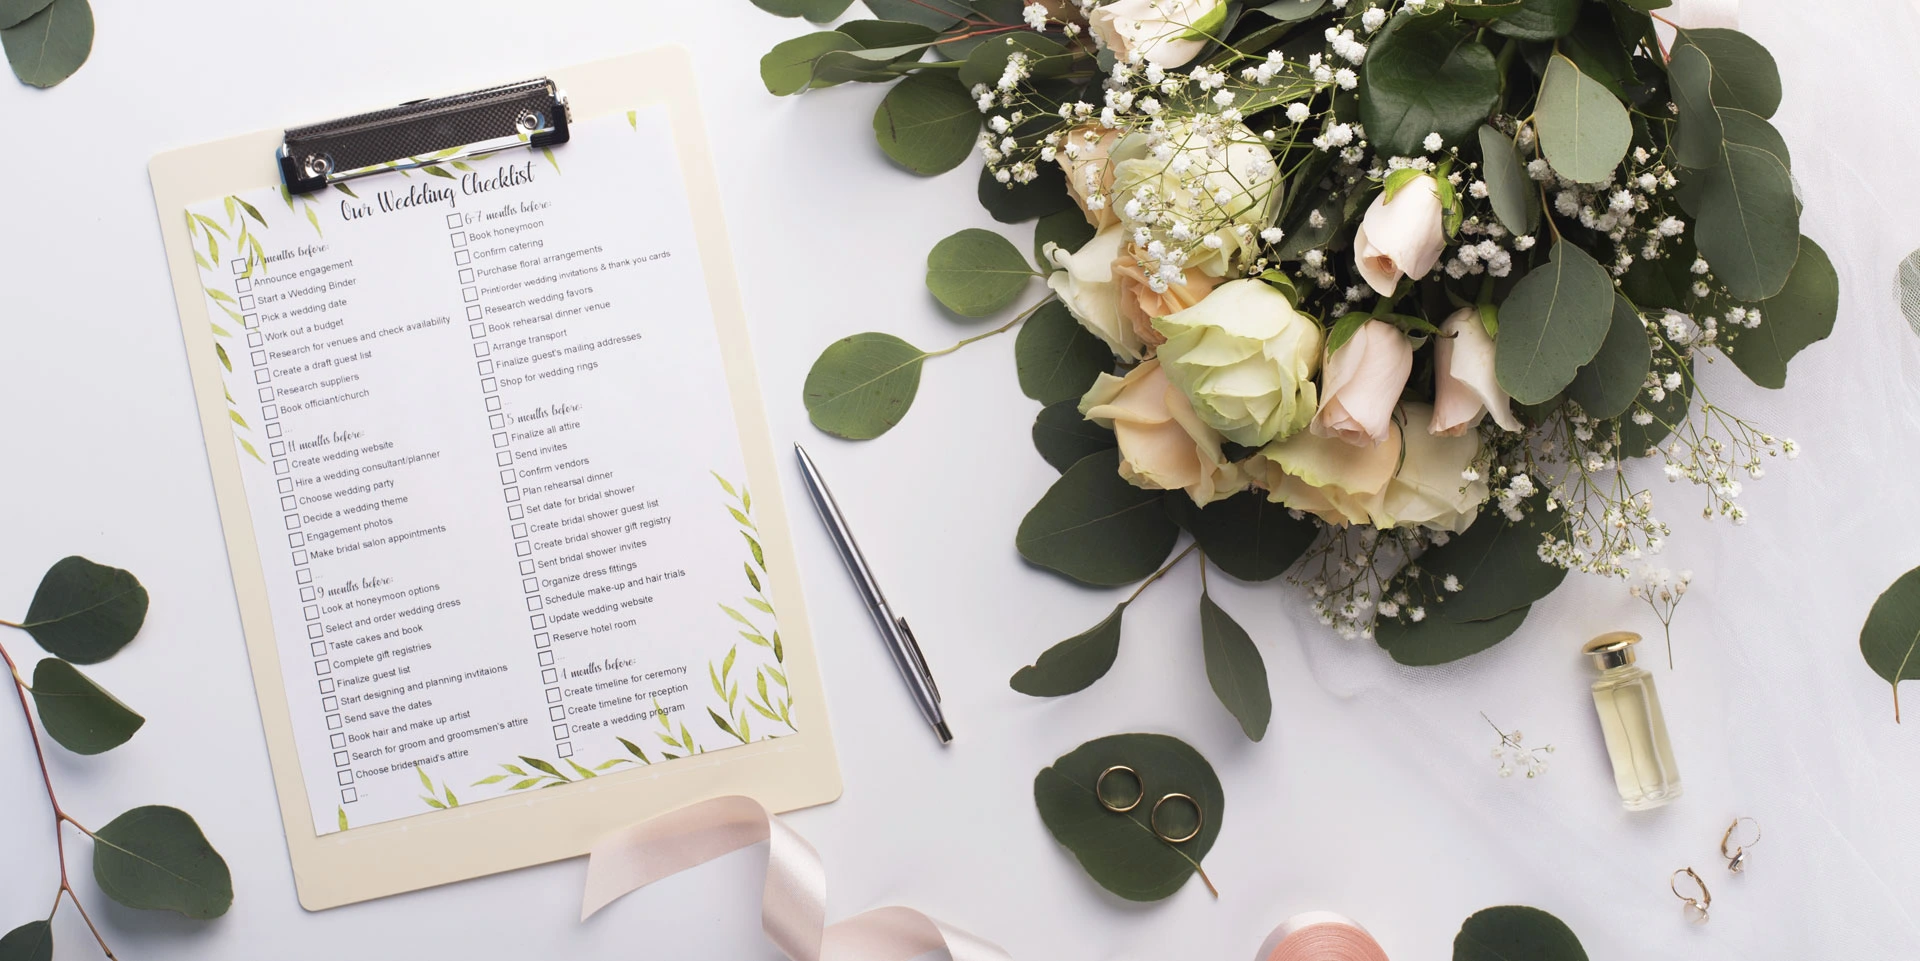 HOW-TO-PLAN-A-WEDDING-STEP-BY-STEP-1